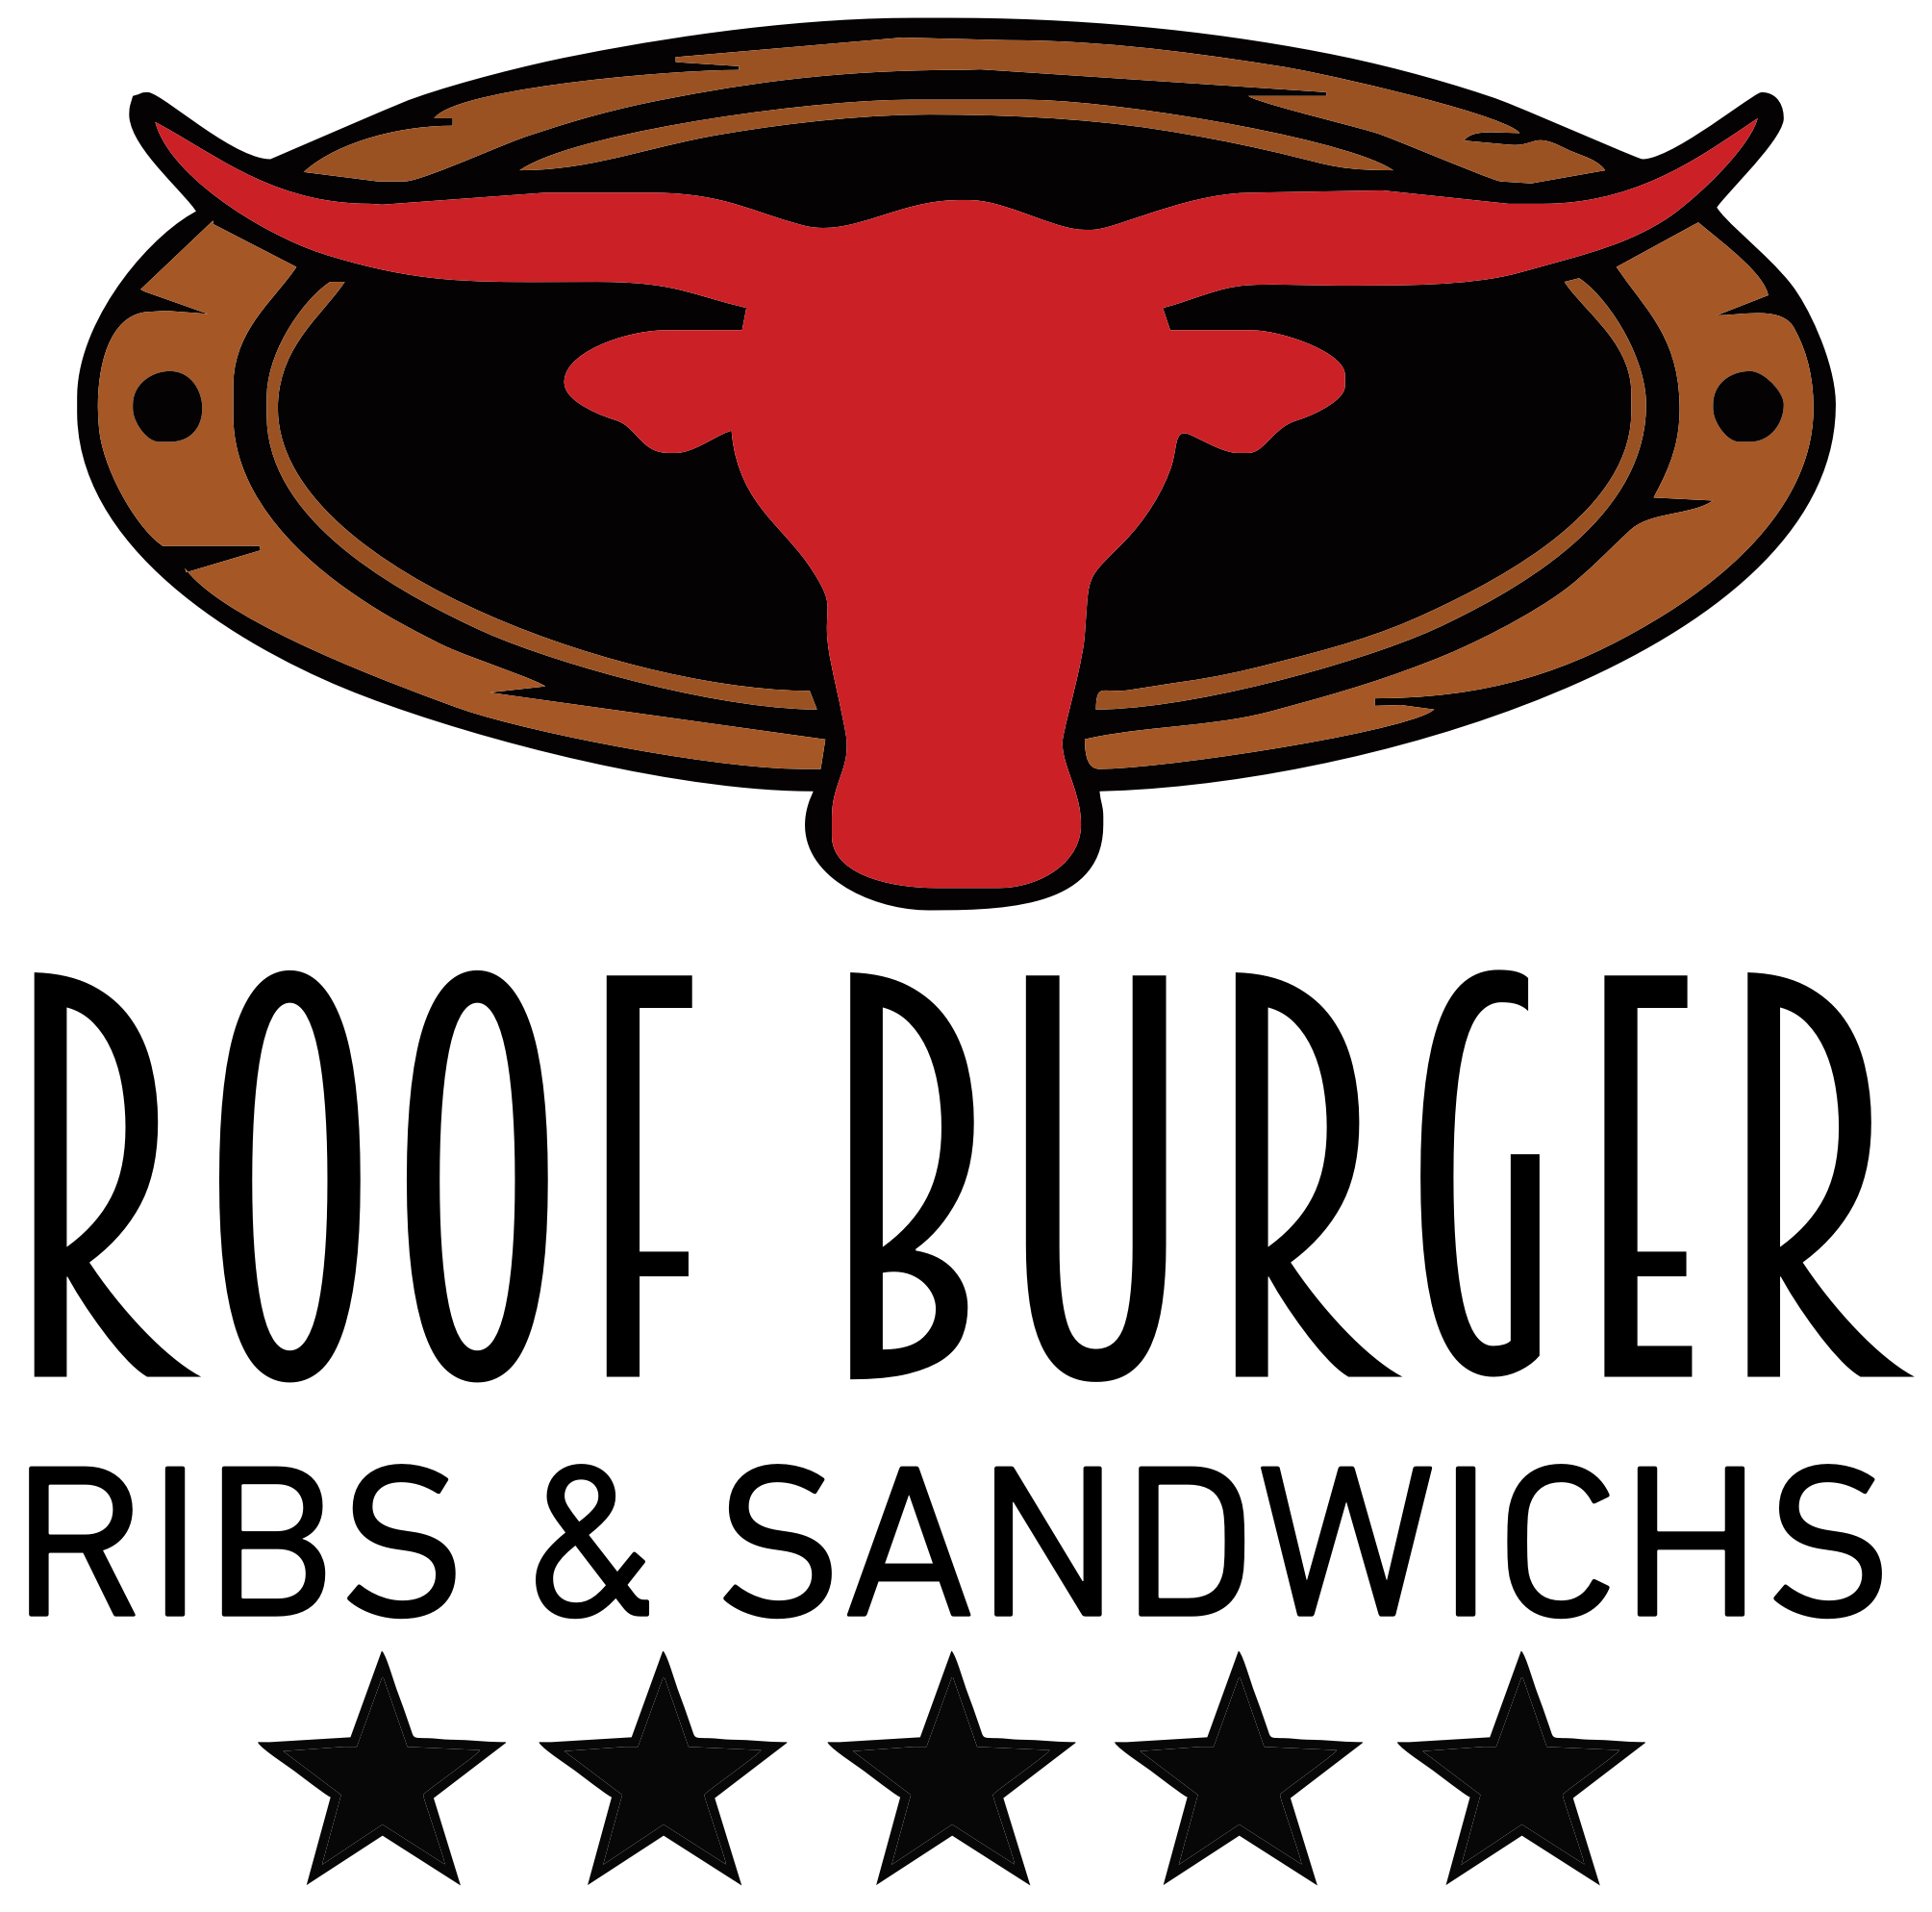 Roof Burger Ribs & Sandwiches